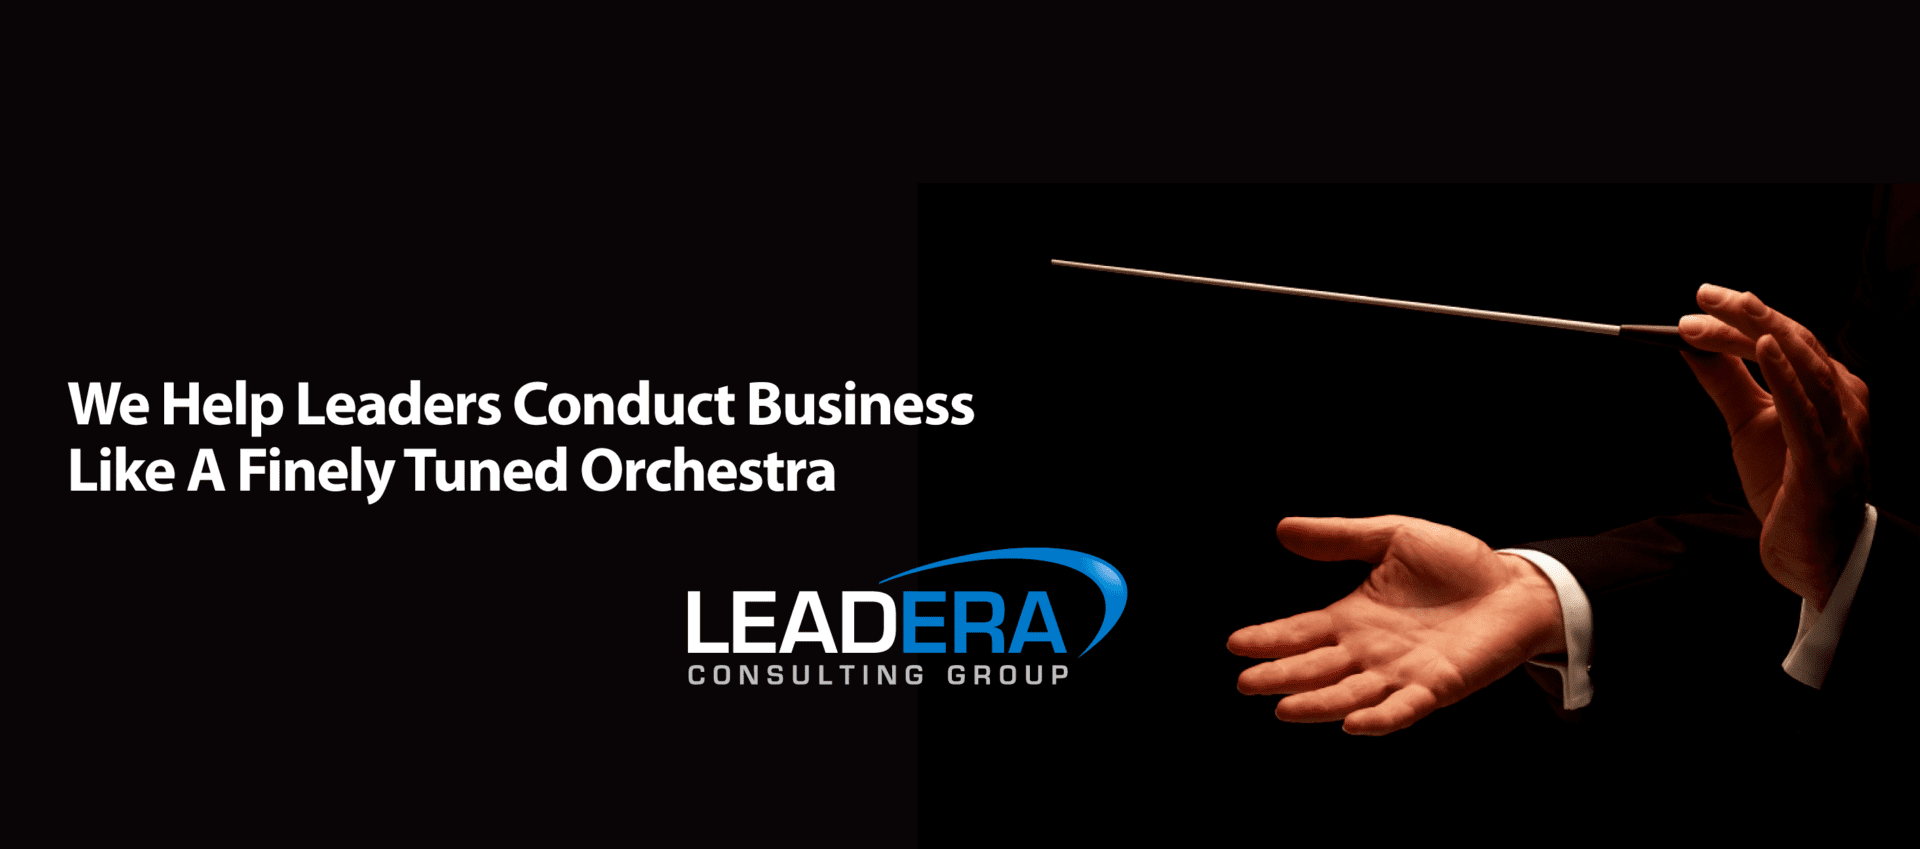 Help leaders conduct business like a well-tuned orchestra.